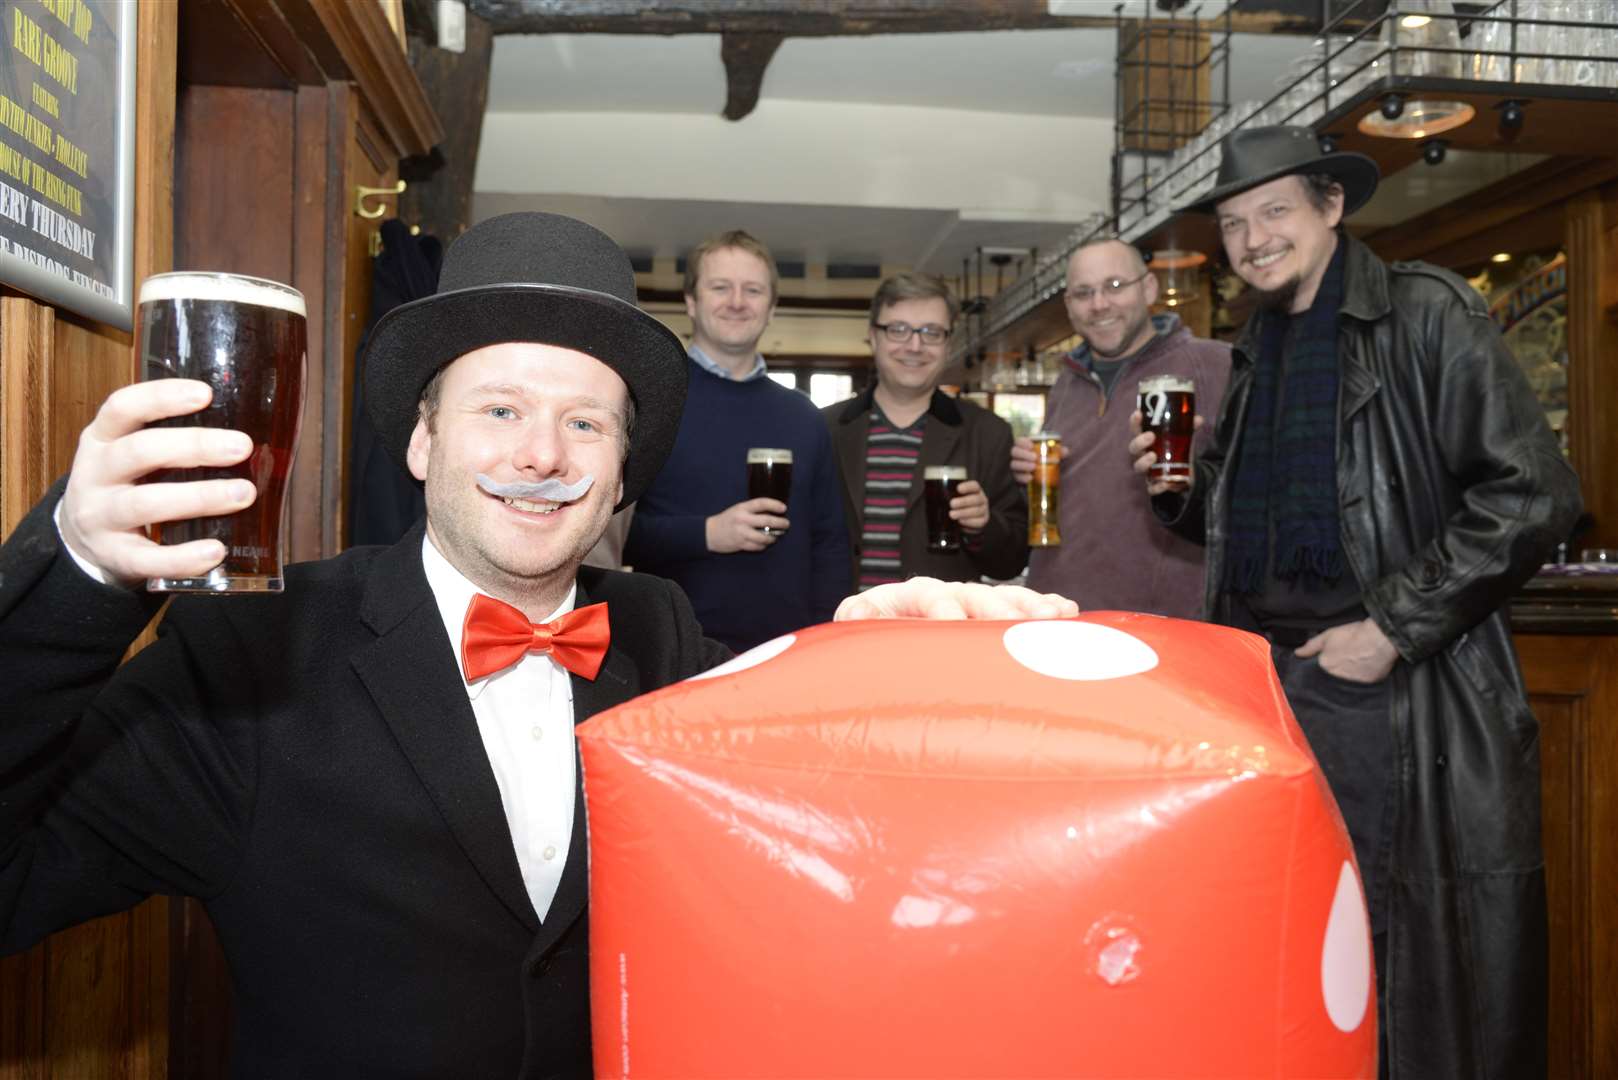 Jamie Price as the Monopoly man with friends